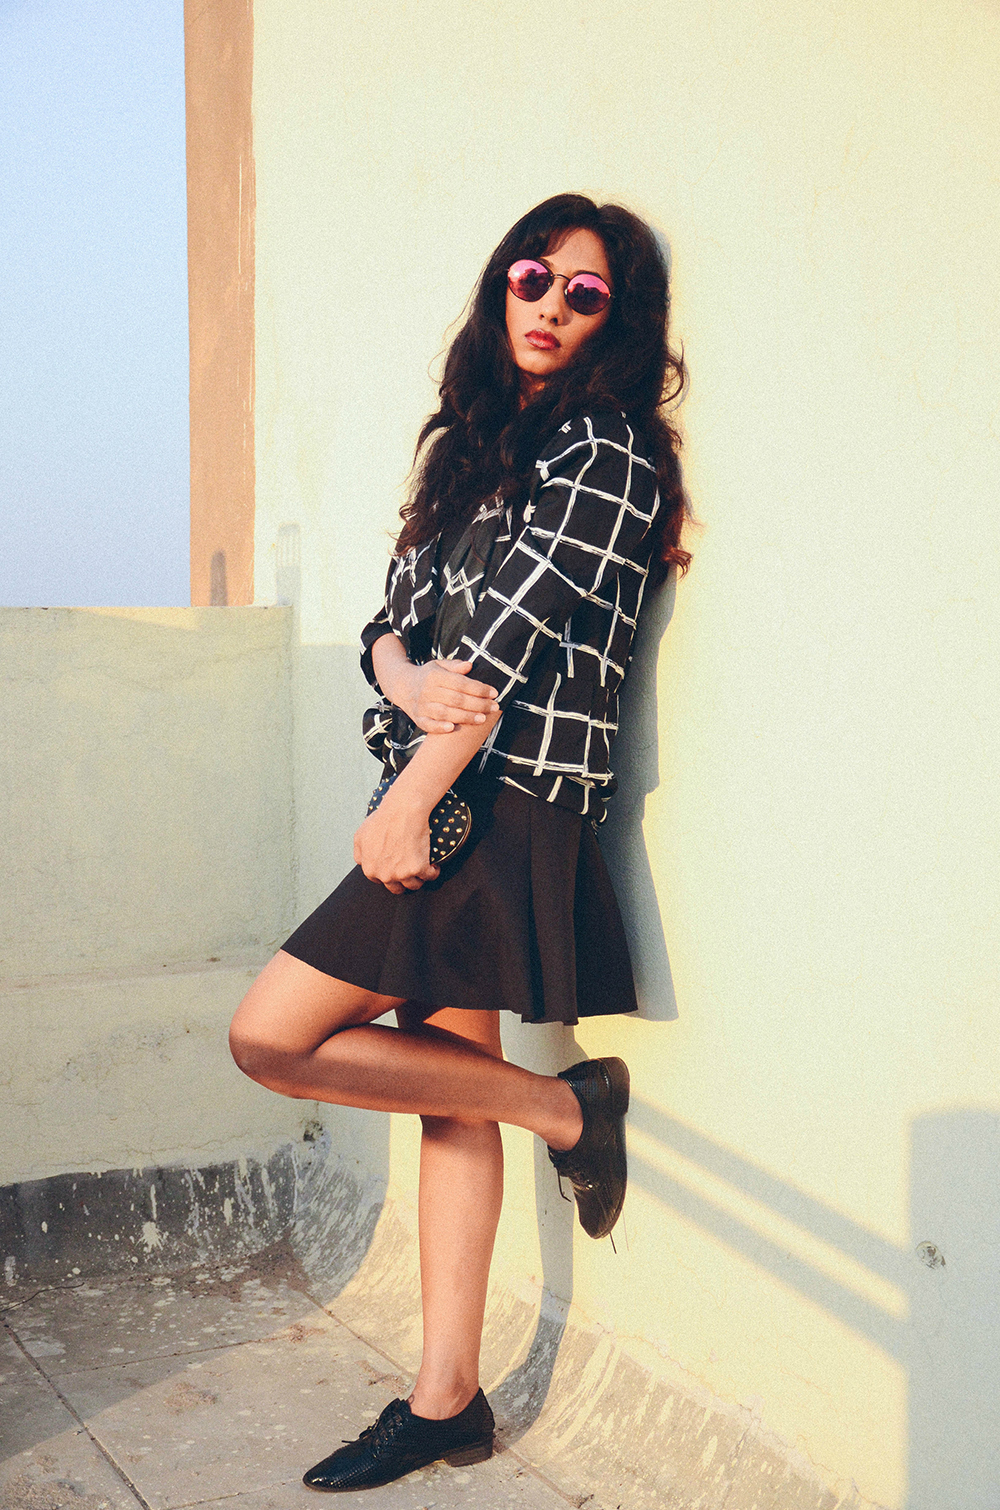 Lookbook ; The Label Life ; Black ; Summer Layering ; Checks; Tinted Glasses ; Outfit ; Lookbook ; Movie Outfit ; Hyderabad ; fashion photography ; dusk ; strong ; Dark ; summer fashion ; summer outfit ; spring ; summer 17; easy chic ; vintage ; Naznin ; Naznin Suhaer ; dusky; model ; hyderabad model ; hyderabad blogger ; indian blogger ; hyderabad fashion bloggers ; hyderabad bloggers ; hyderabad fashion blogger ; I Dress for the Applause ; 